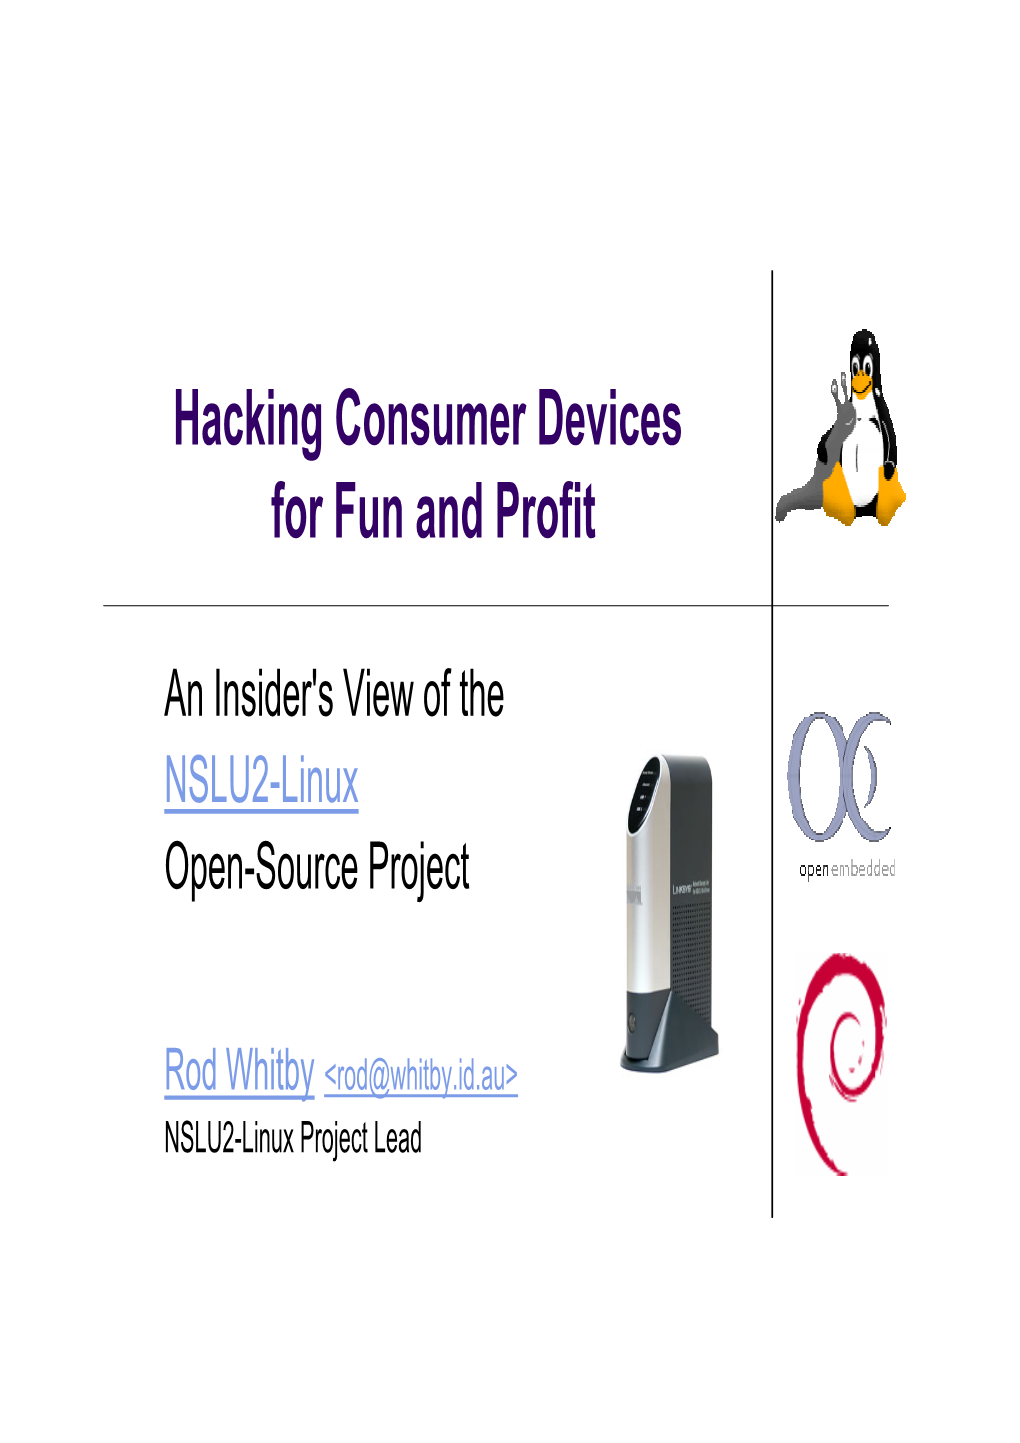 Hacking Consumer Devices for Fun and Profit